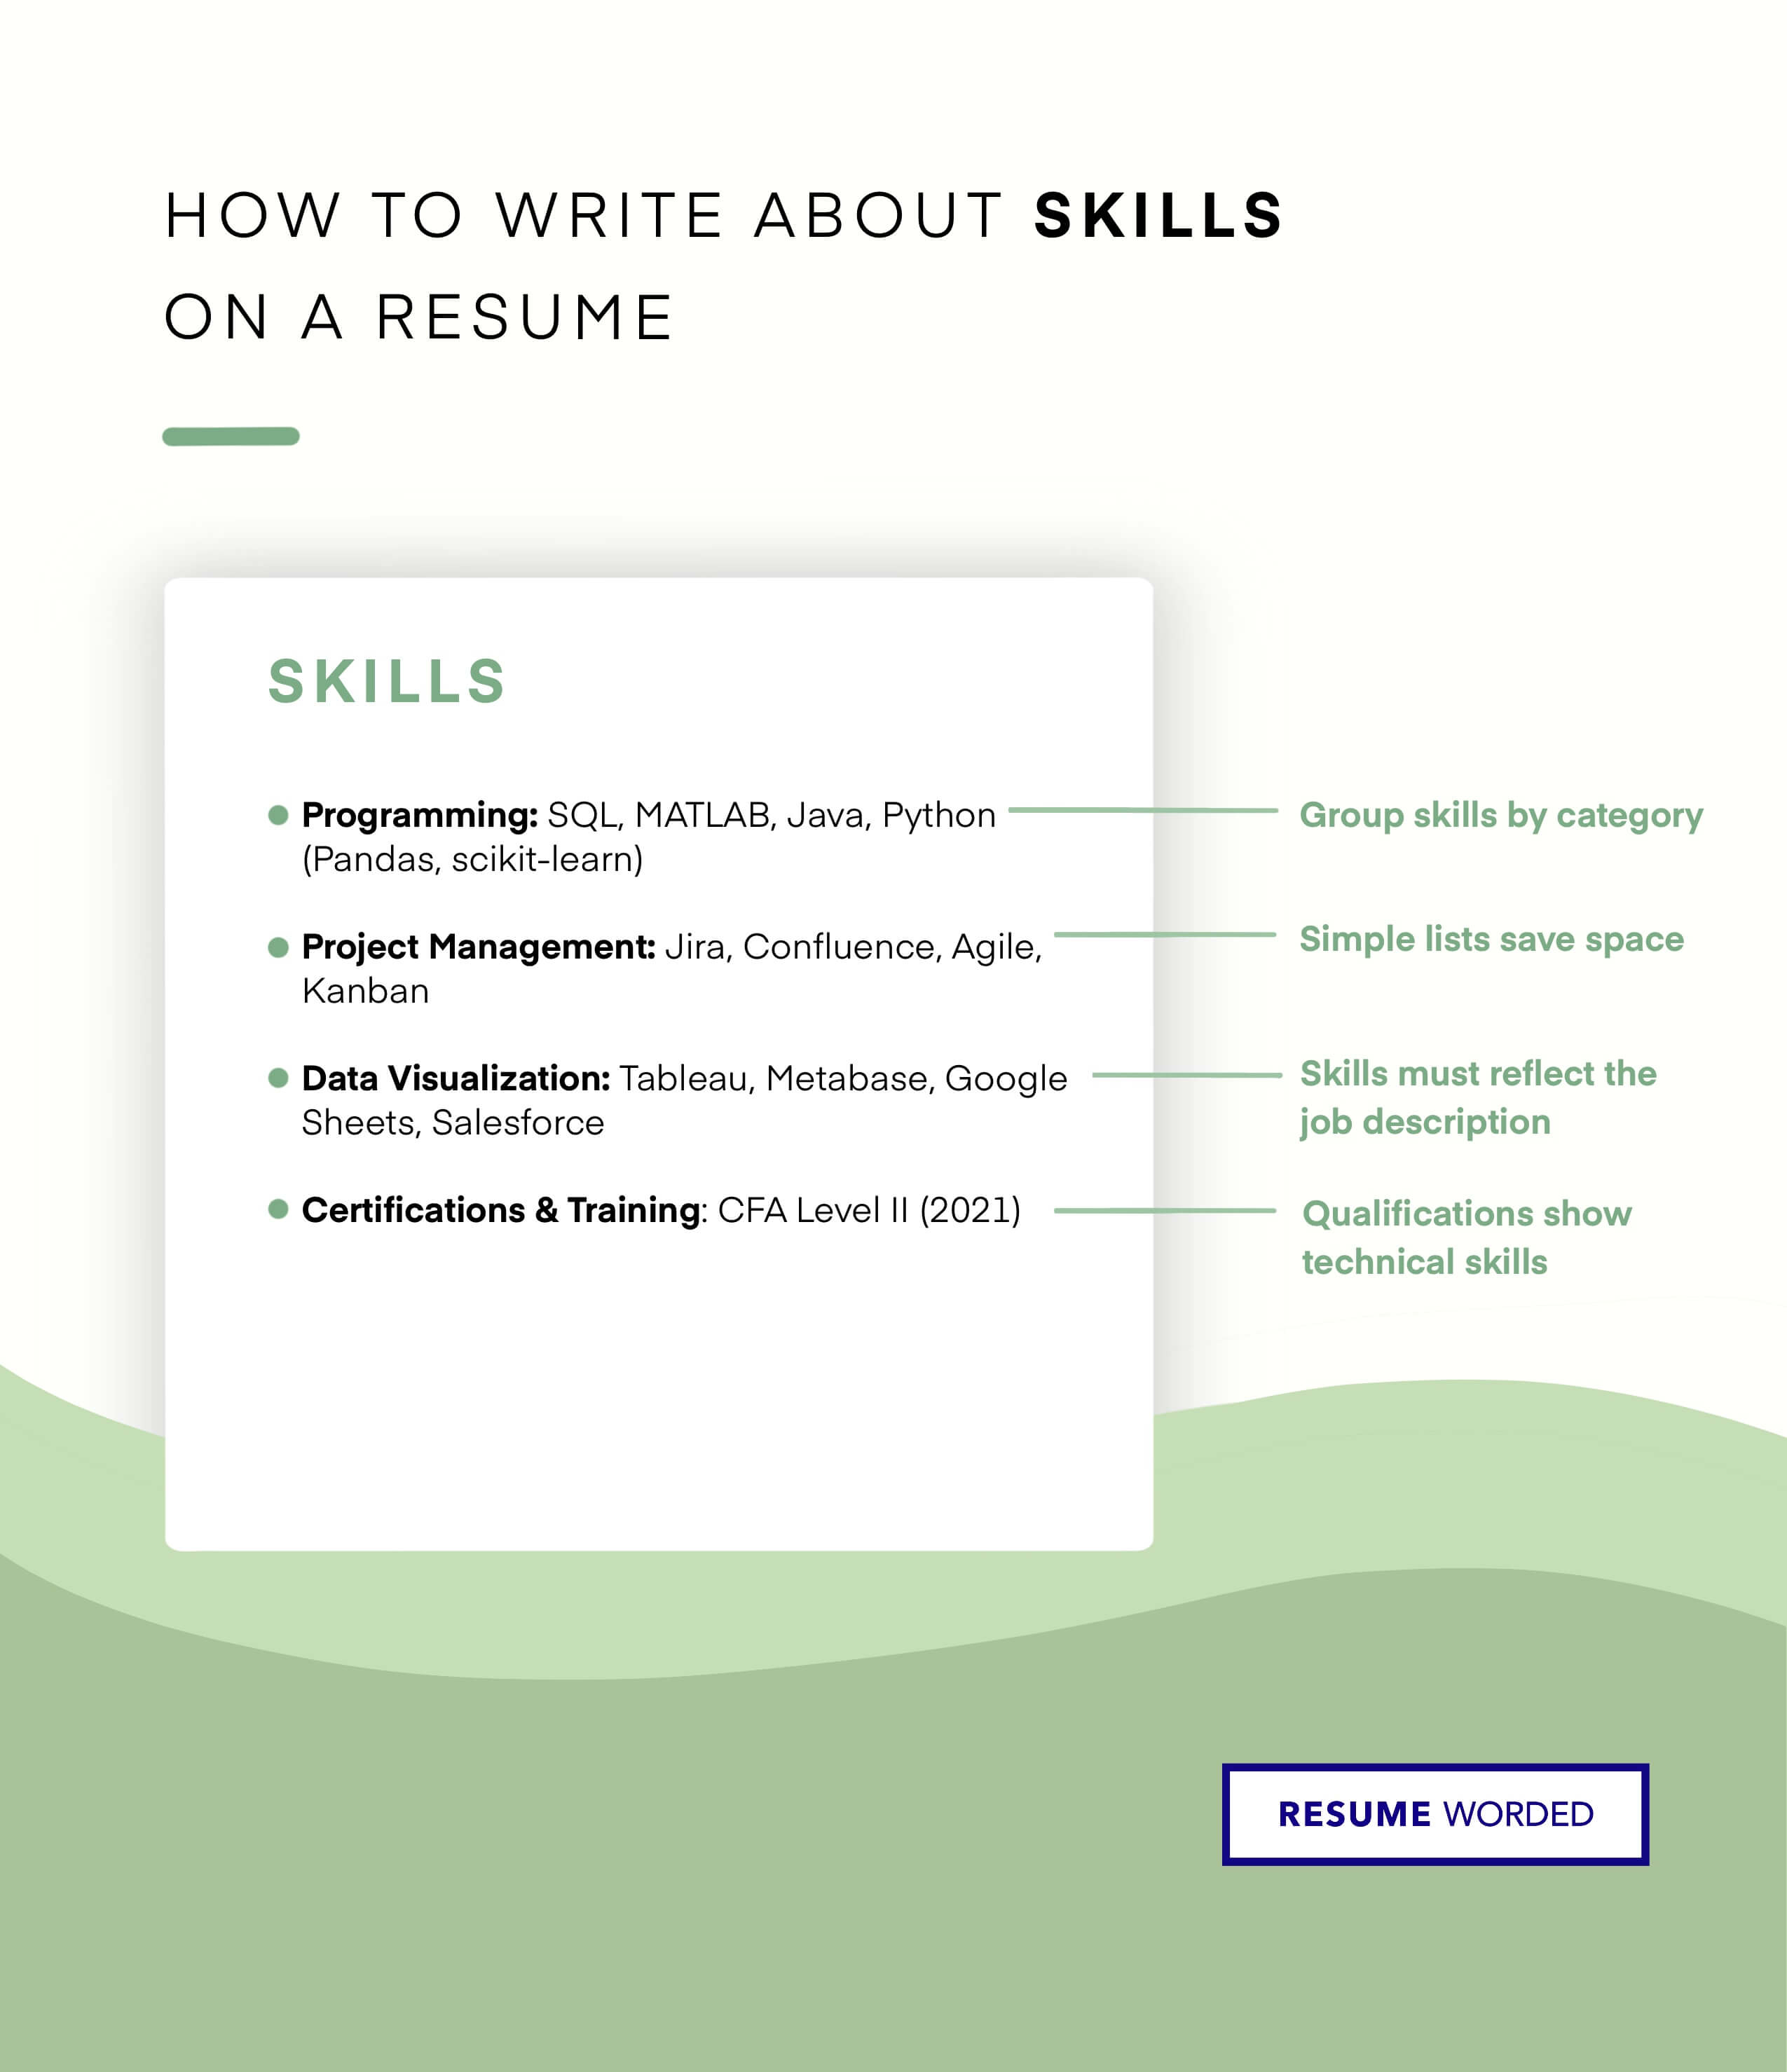 Ensure your skills list is in line with the listed job requirements. - Investment Banking Associate Resume